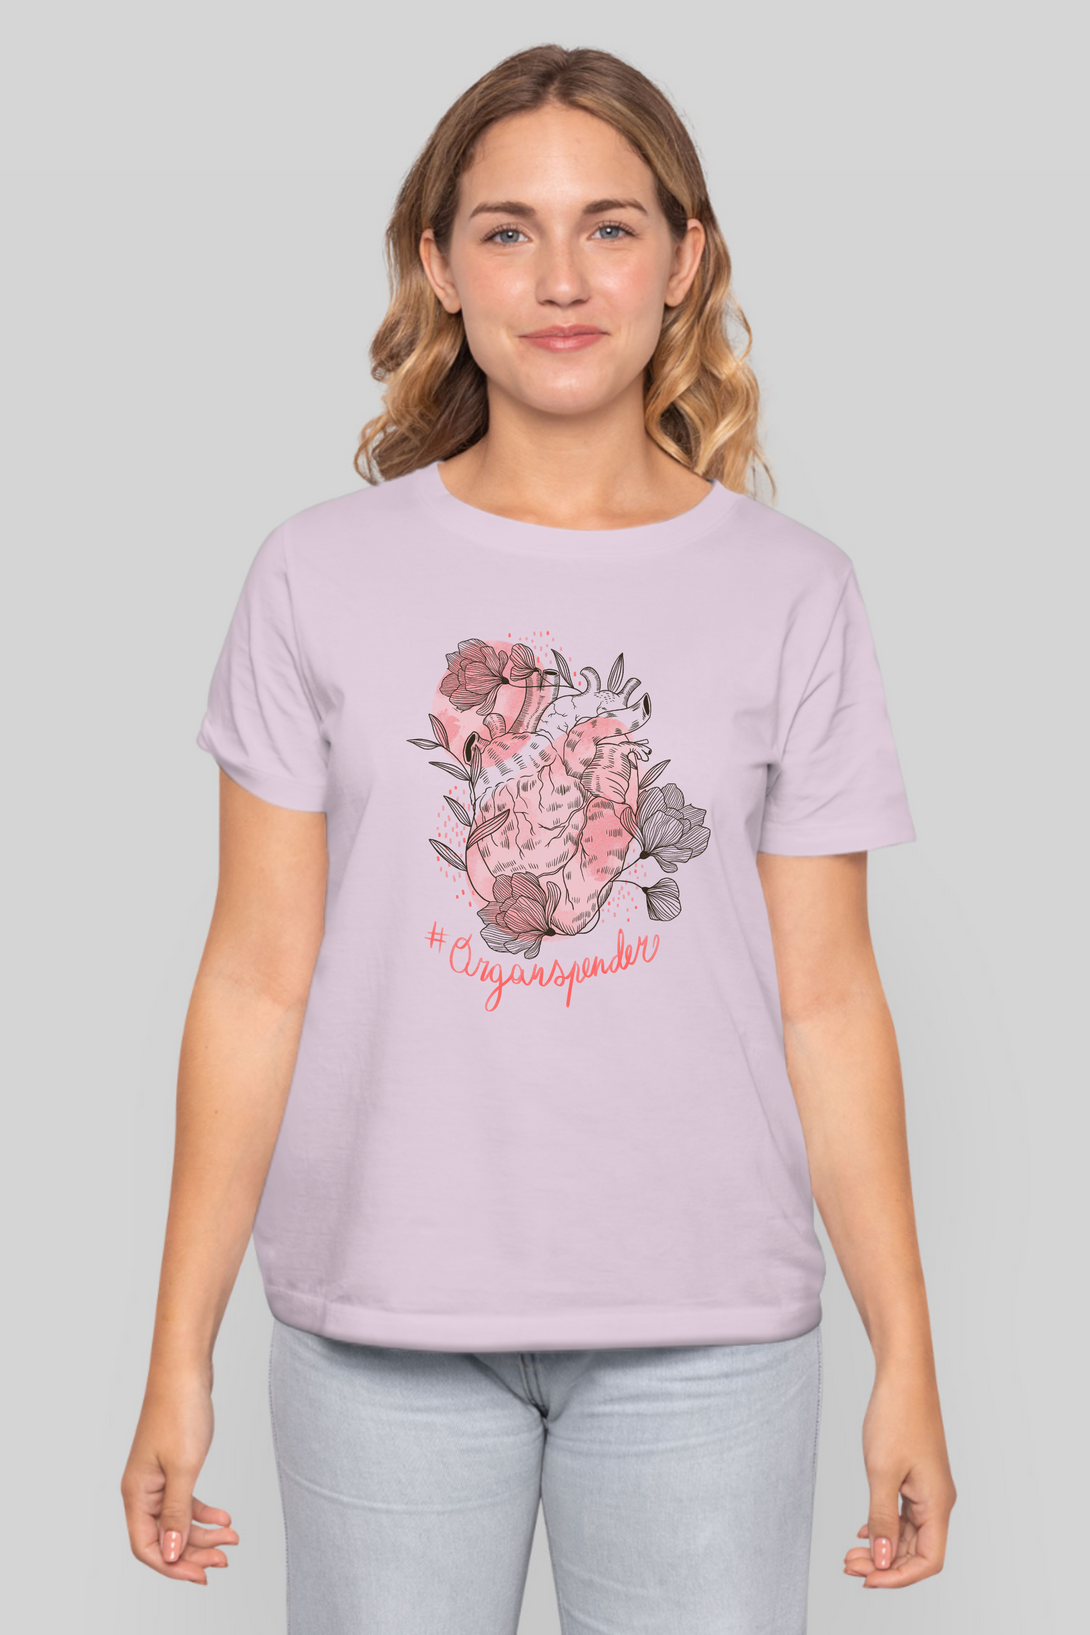 Blossoming Love Printed T-Shirt For Women - WowWaves - 7